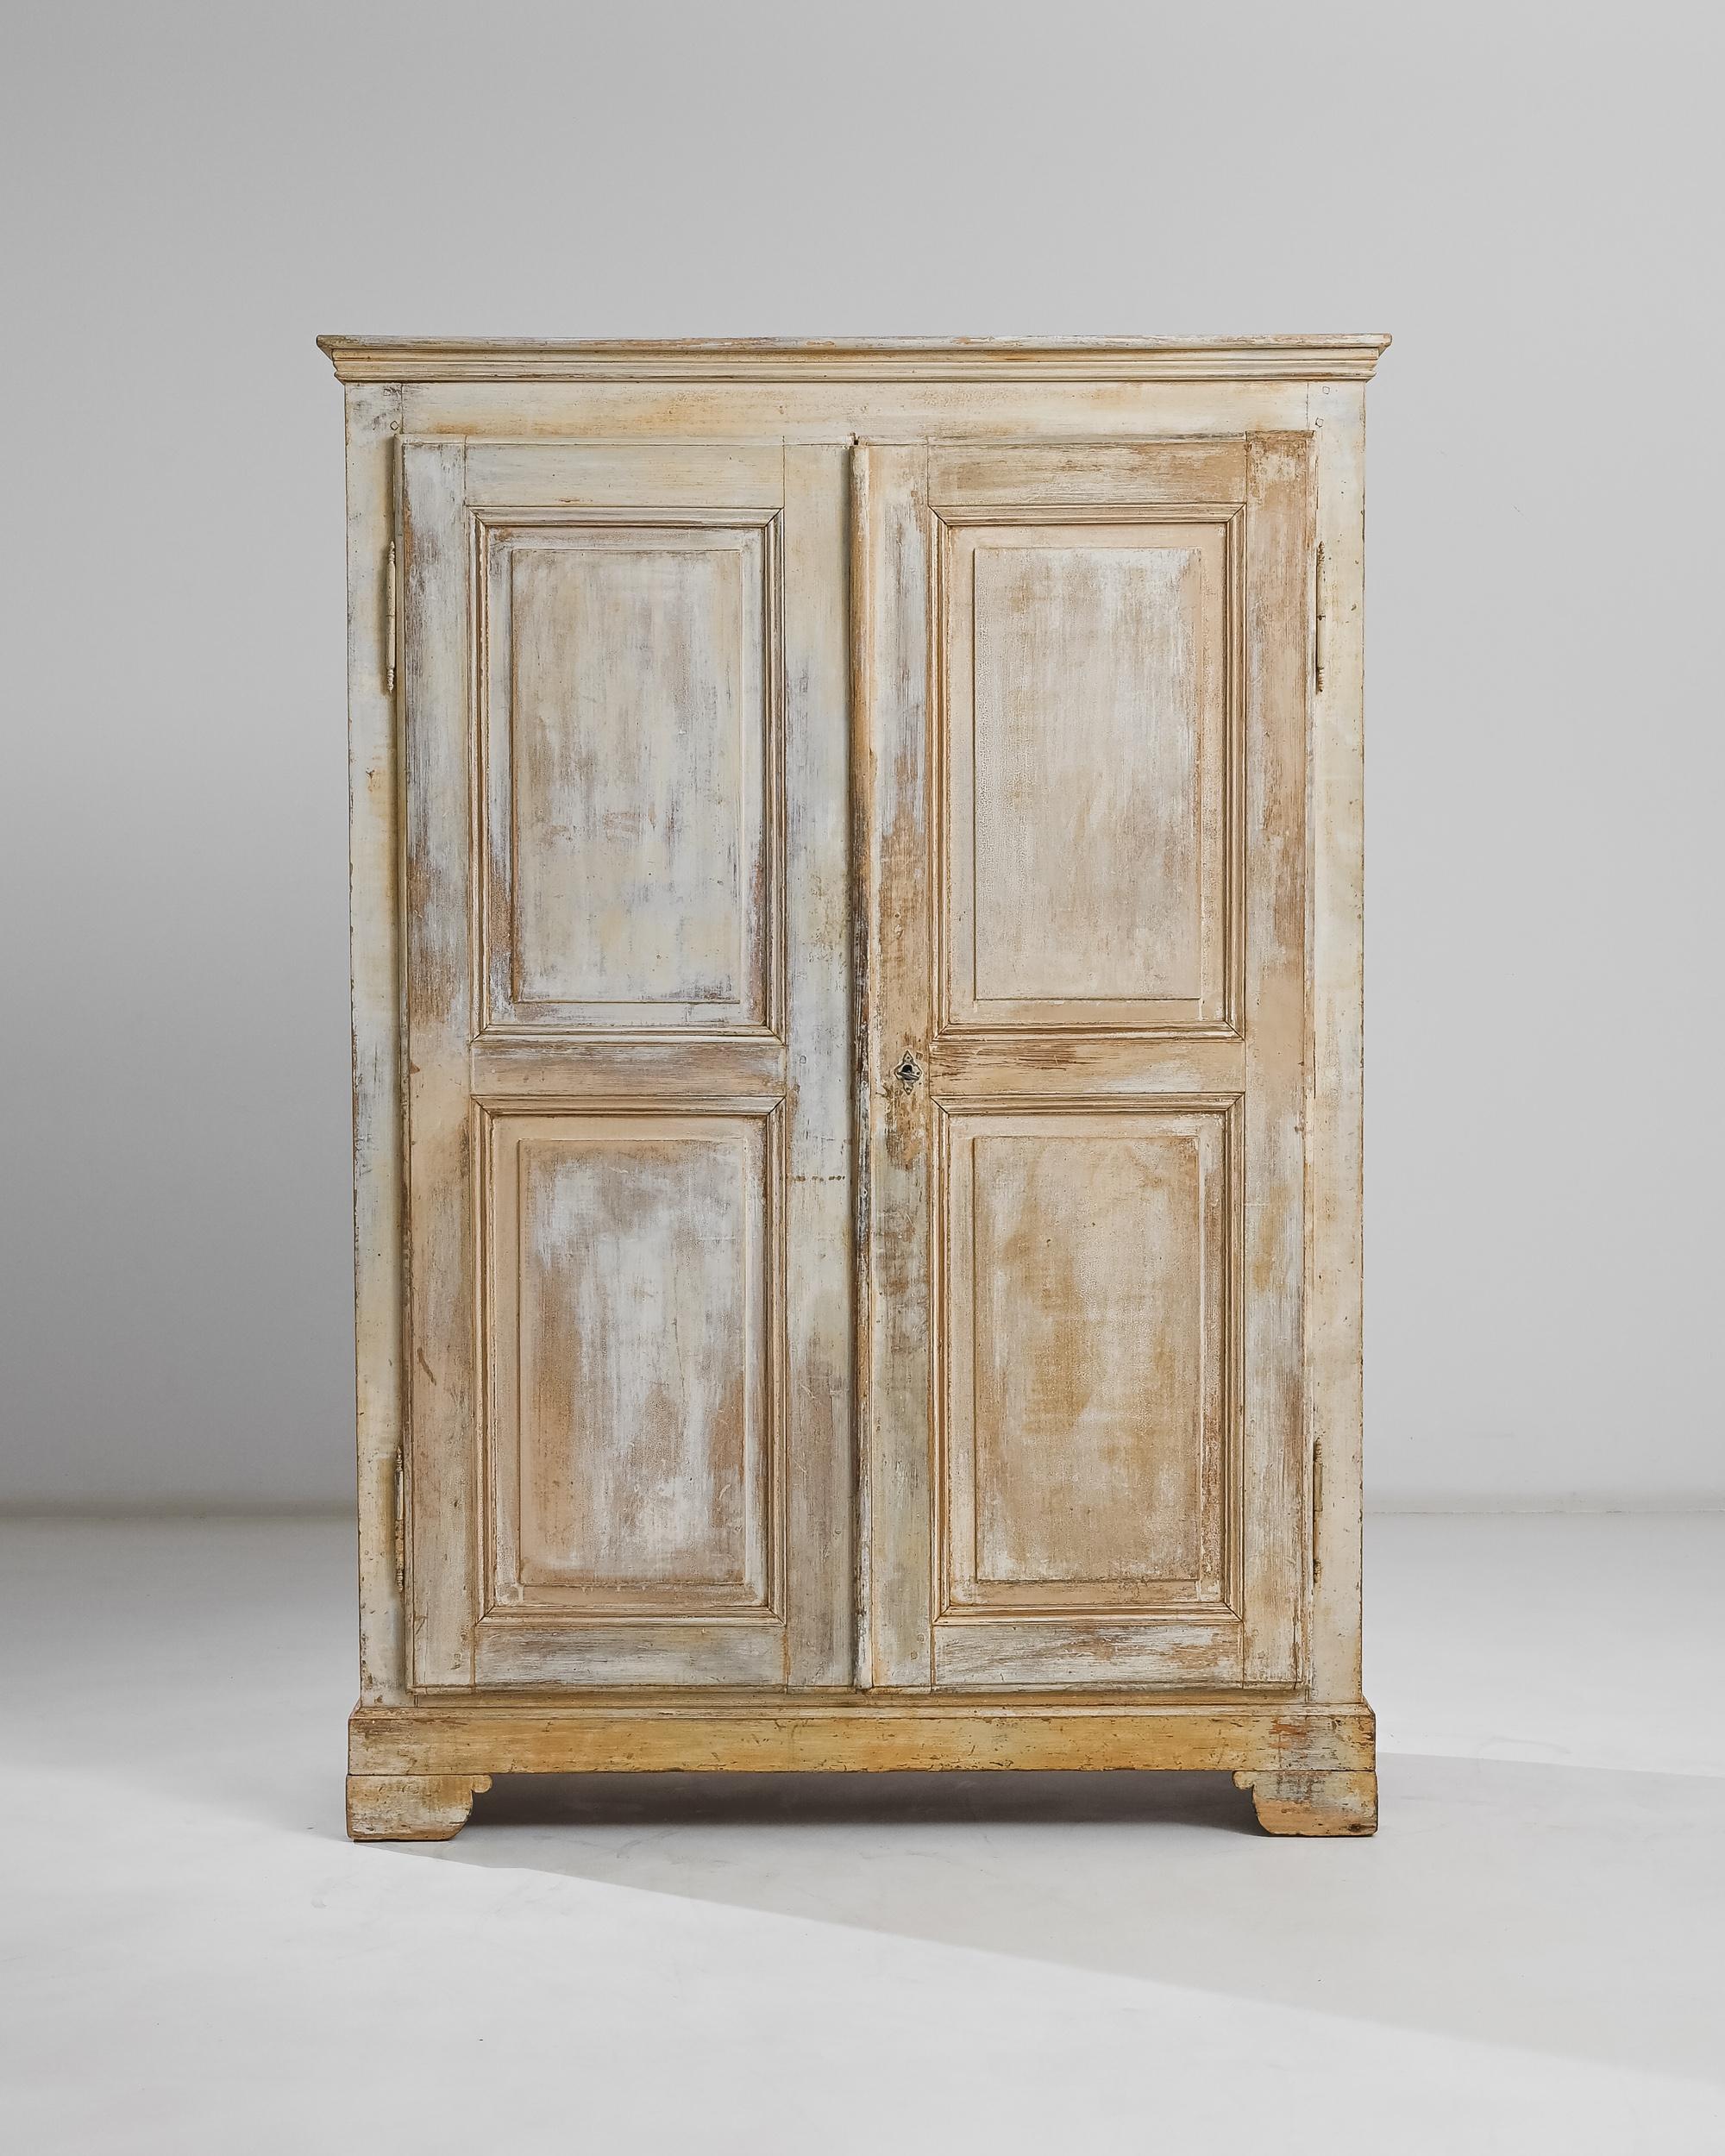 This wooden cabinet was produced in France, circa 1900. Crowned by a molded cornice, this five-shelf cabinet elevates to just under six feet high and balances its upright case on top of four bracket feet. Exhibiting a pleasing patina, the wood